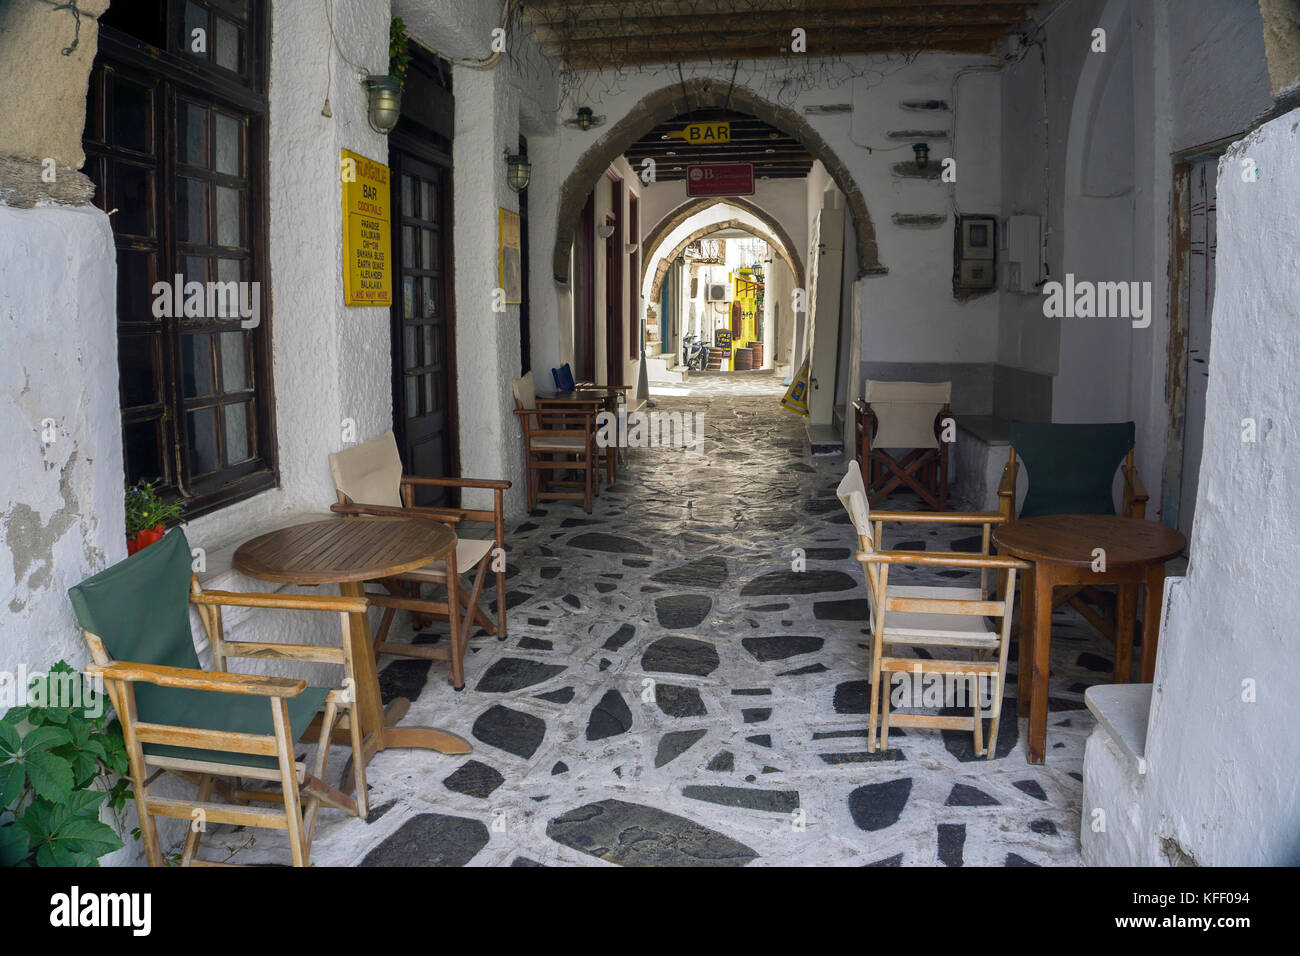 Gateway at a alley, old town of Naxos-town, Naxos island, Cyclades, Aegean, Greece Stock Photo